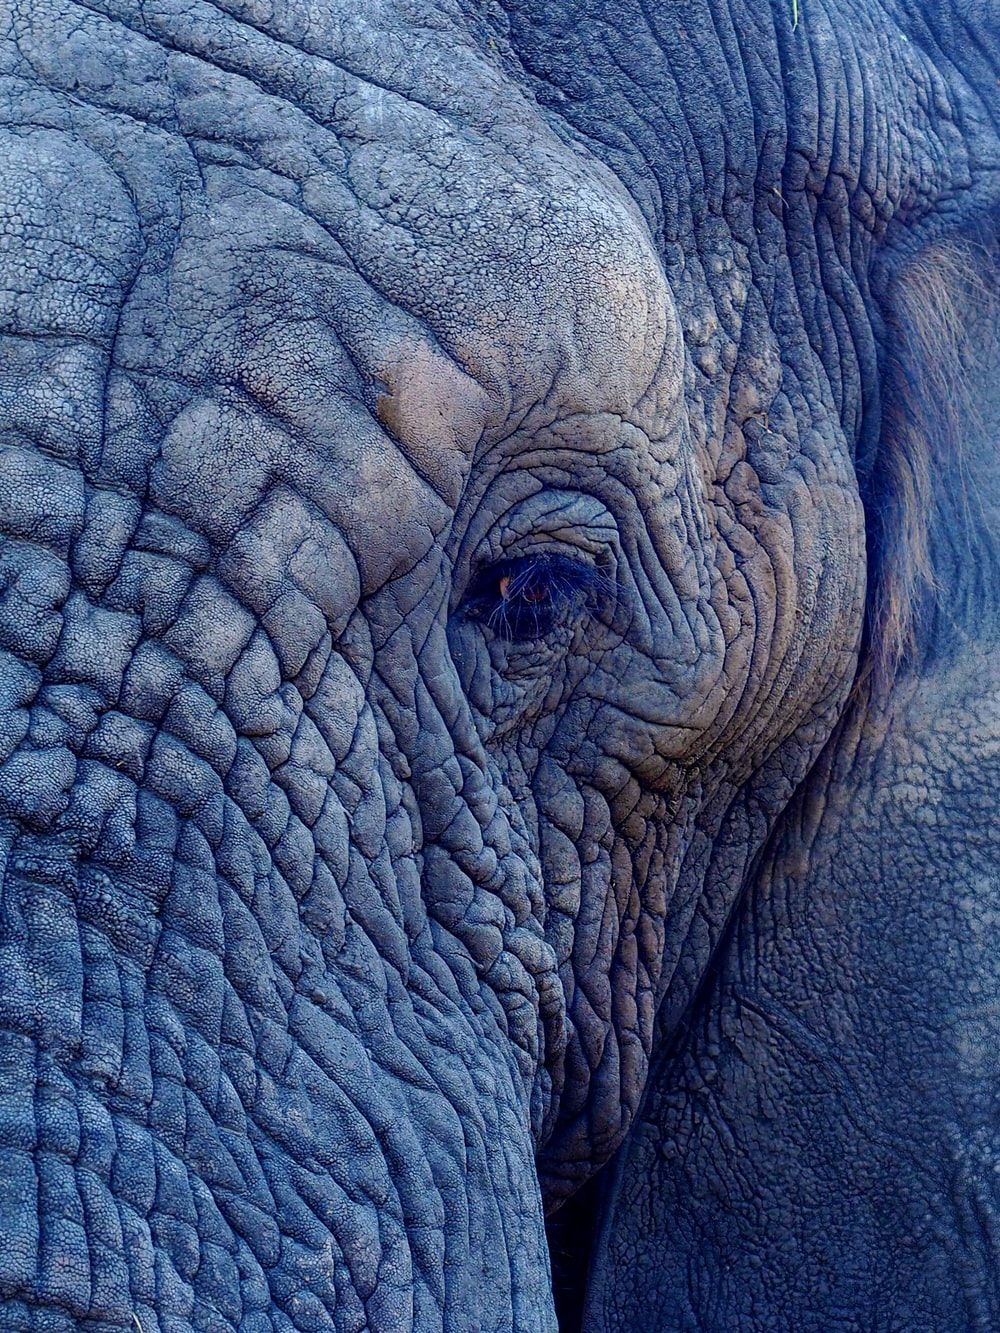 Elephant Picture [HD]. Download Free Image